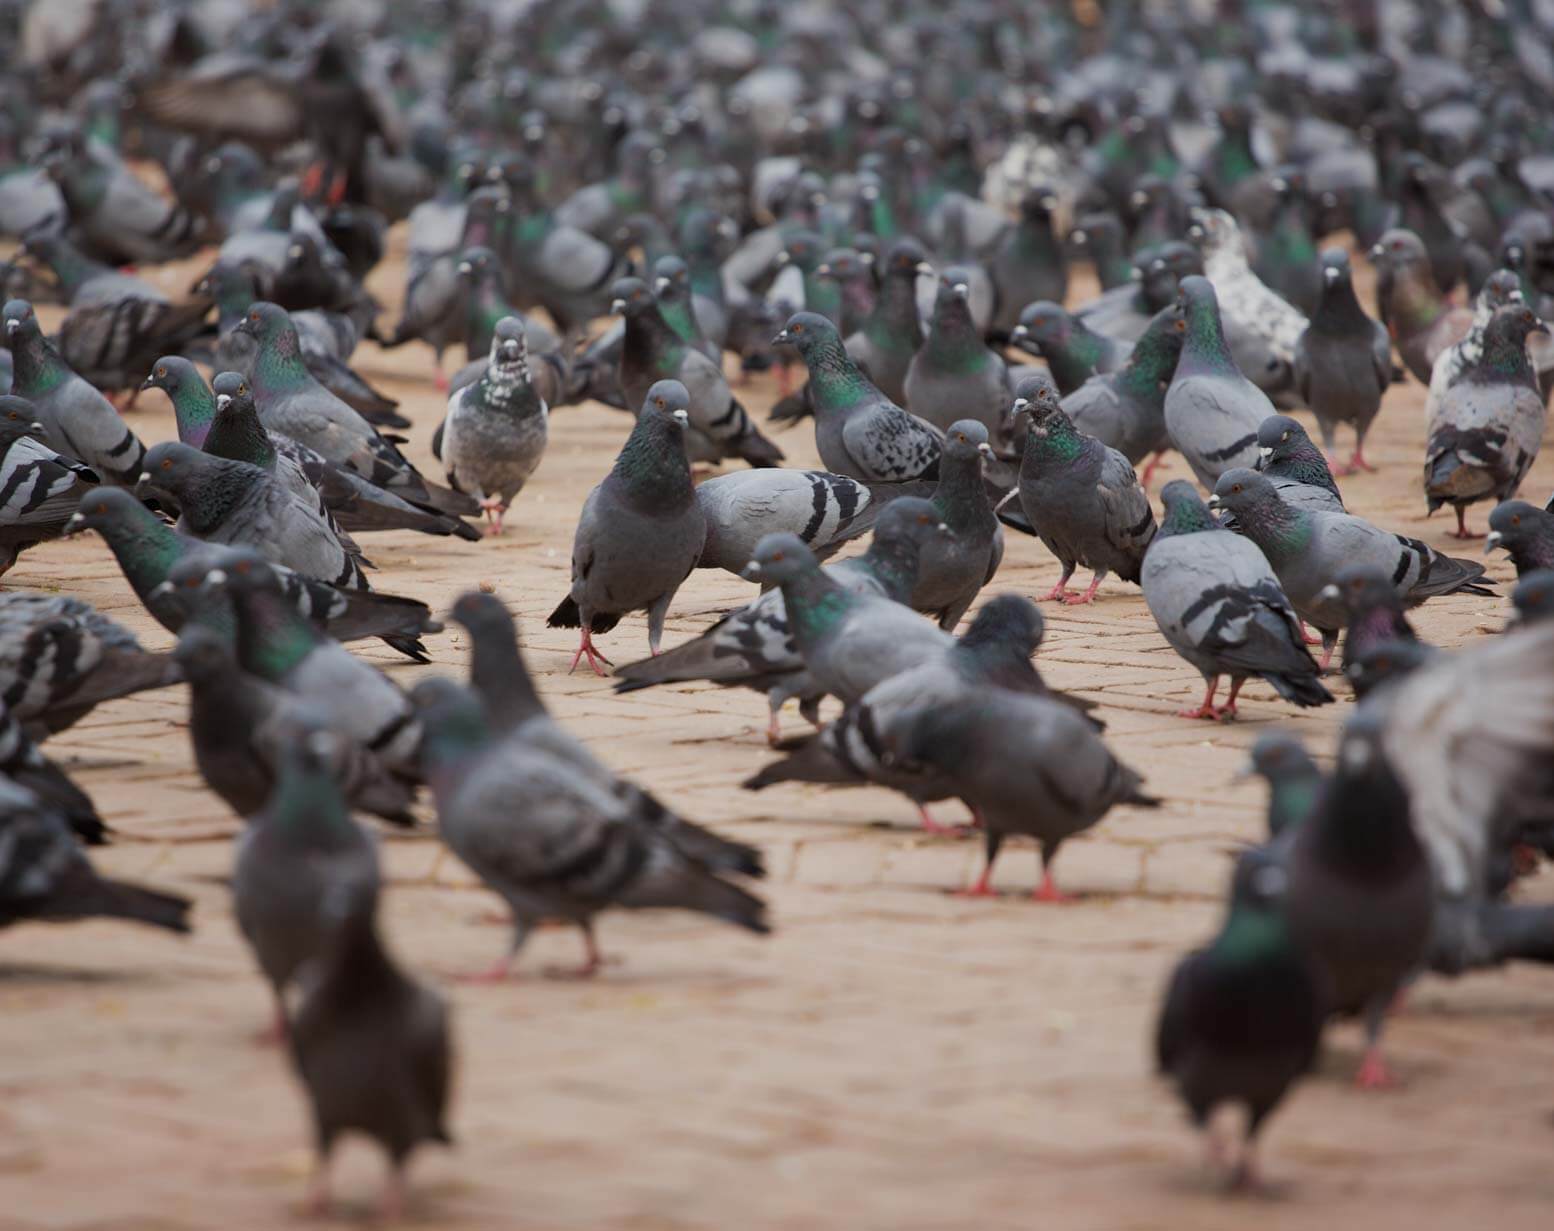 Large numbers of pest pigeons gather on market street, urgent control measures need bringing in by our Stourbridge pest control experts